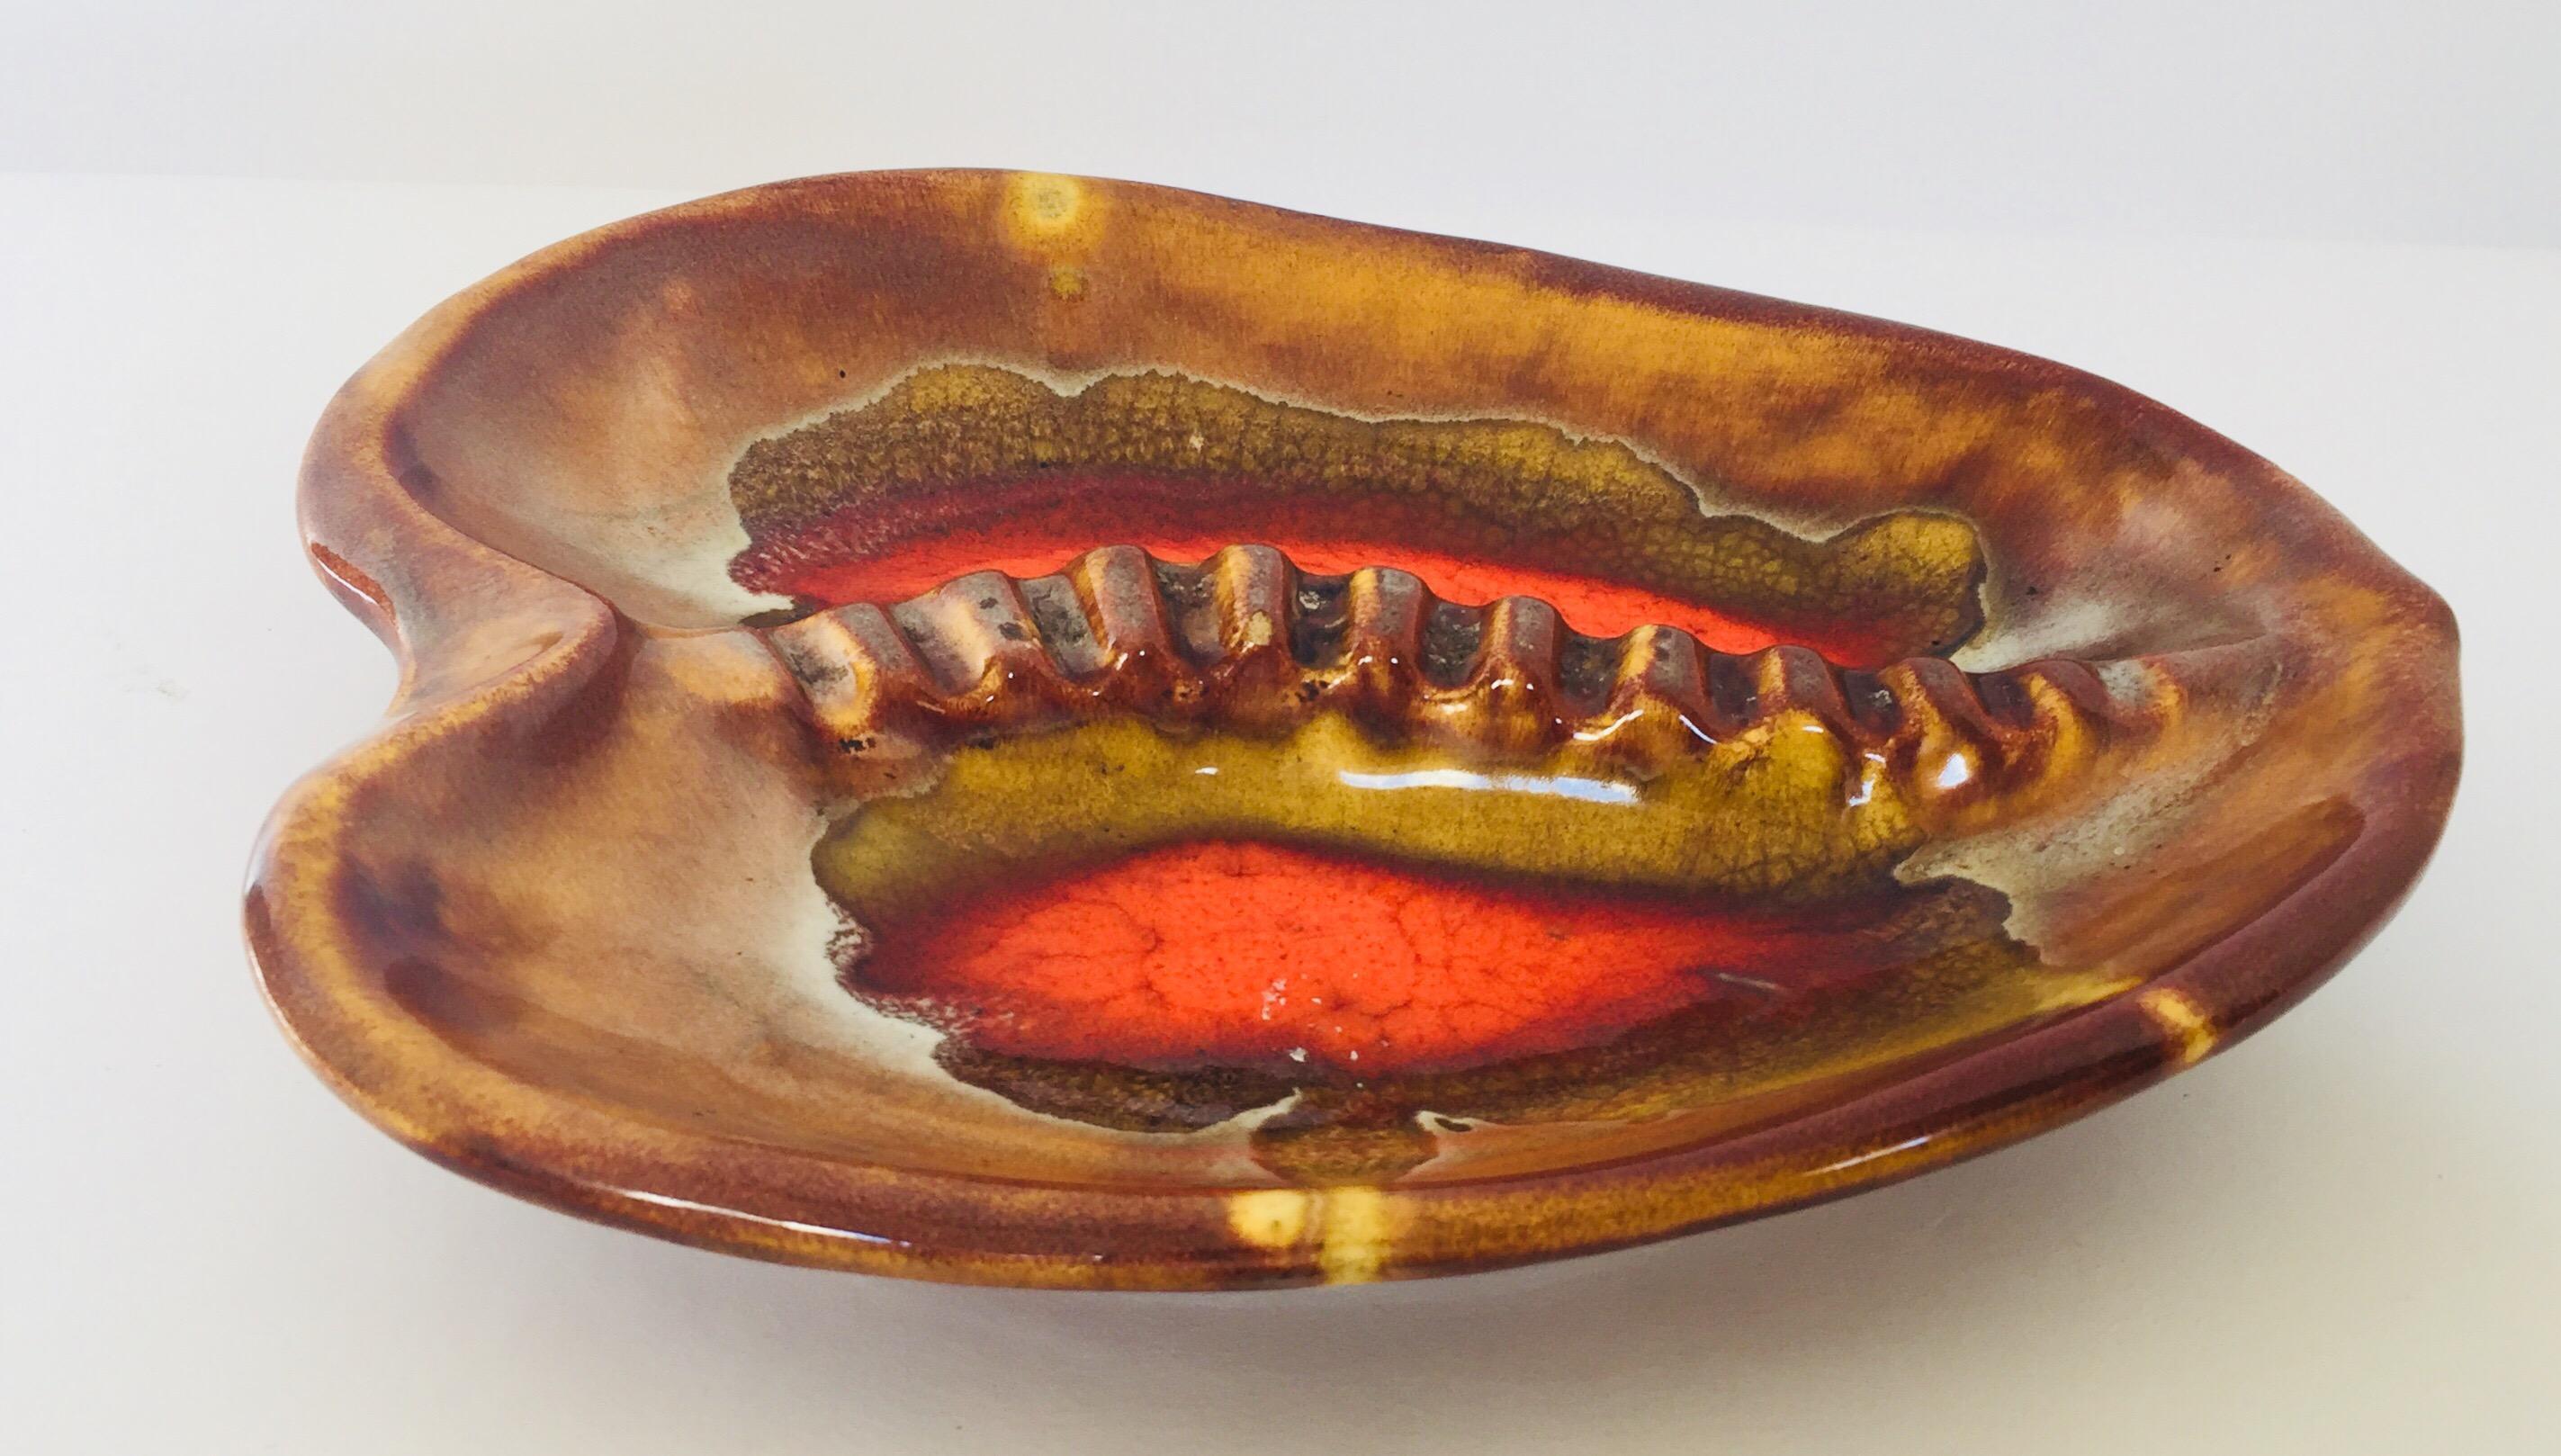 California Pottery, large vintage ceramic ashtray in retro bright orange, red, browns and yellow flamed colors.
Kidney shape made in California USA.